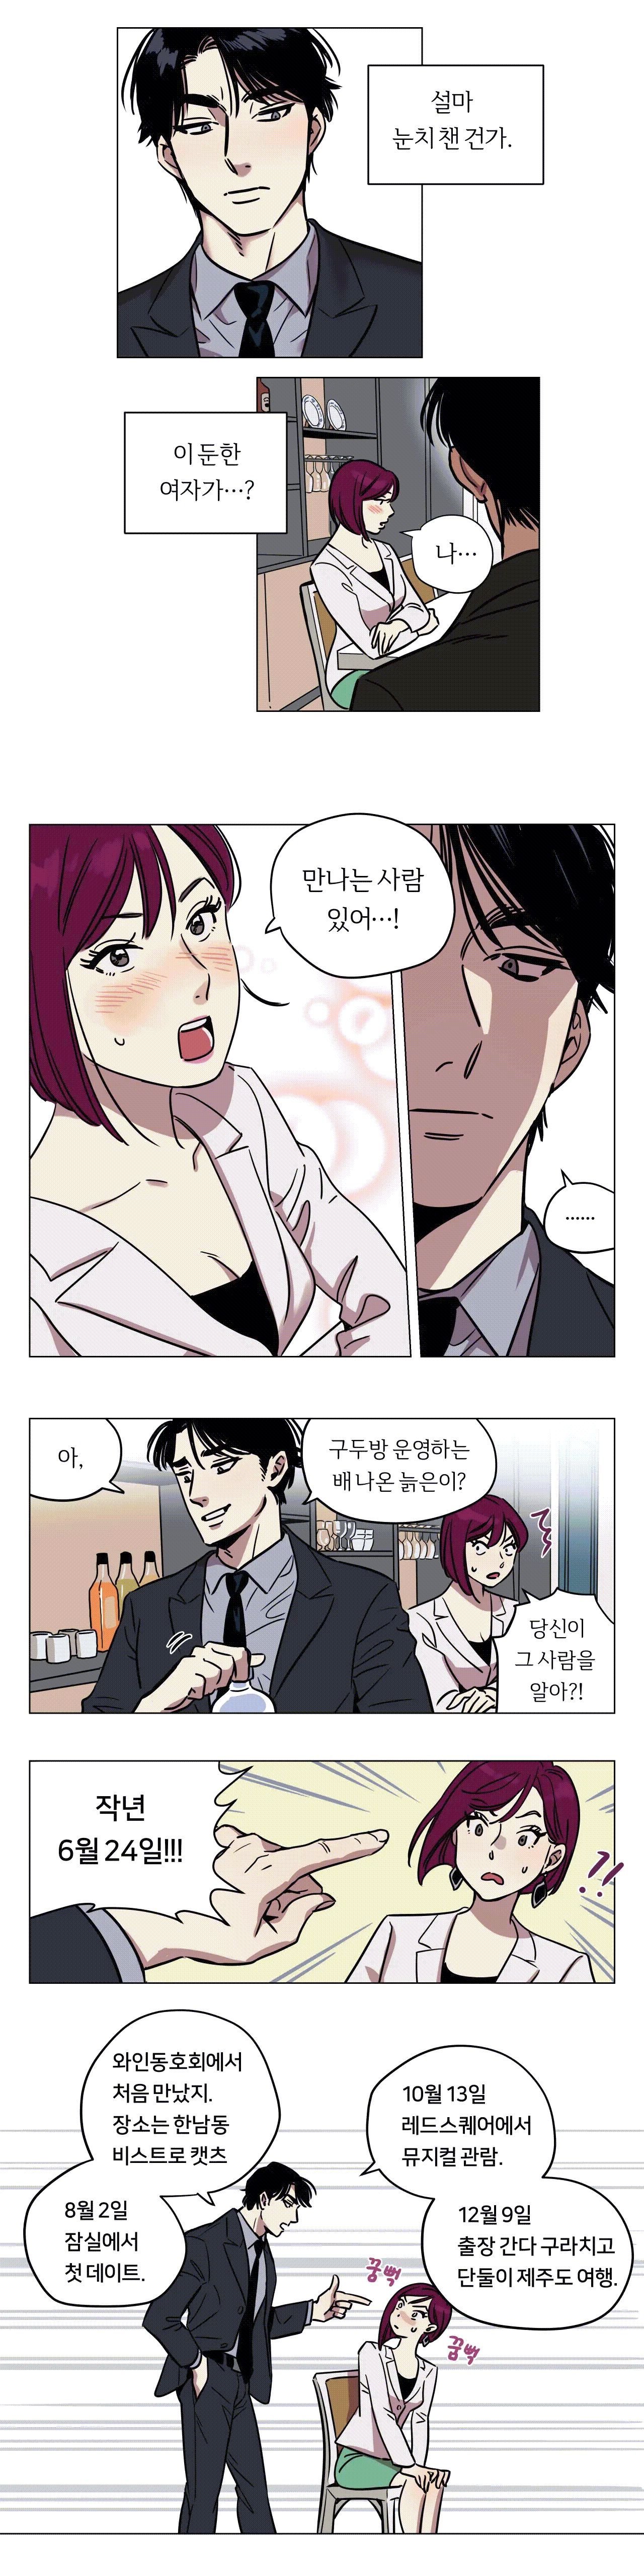 Snowman Raw - Chapter 1 Page 10